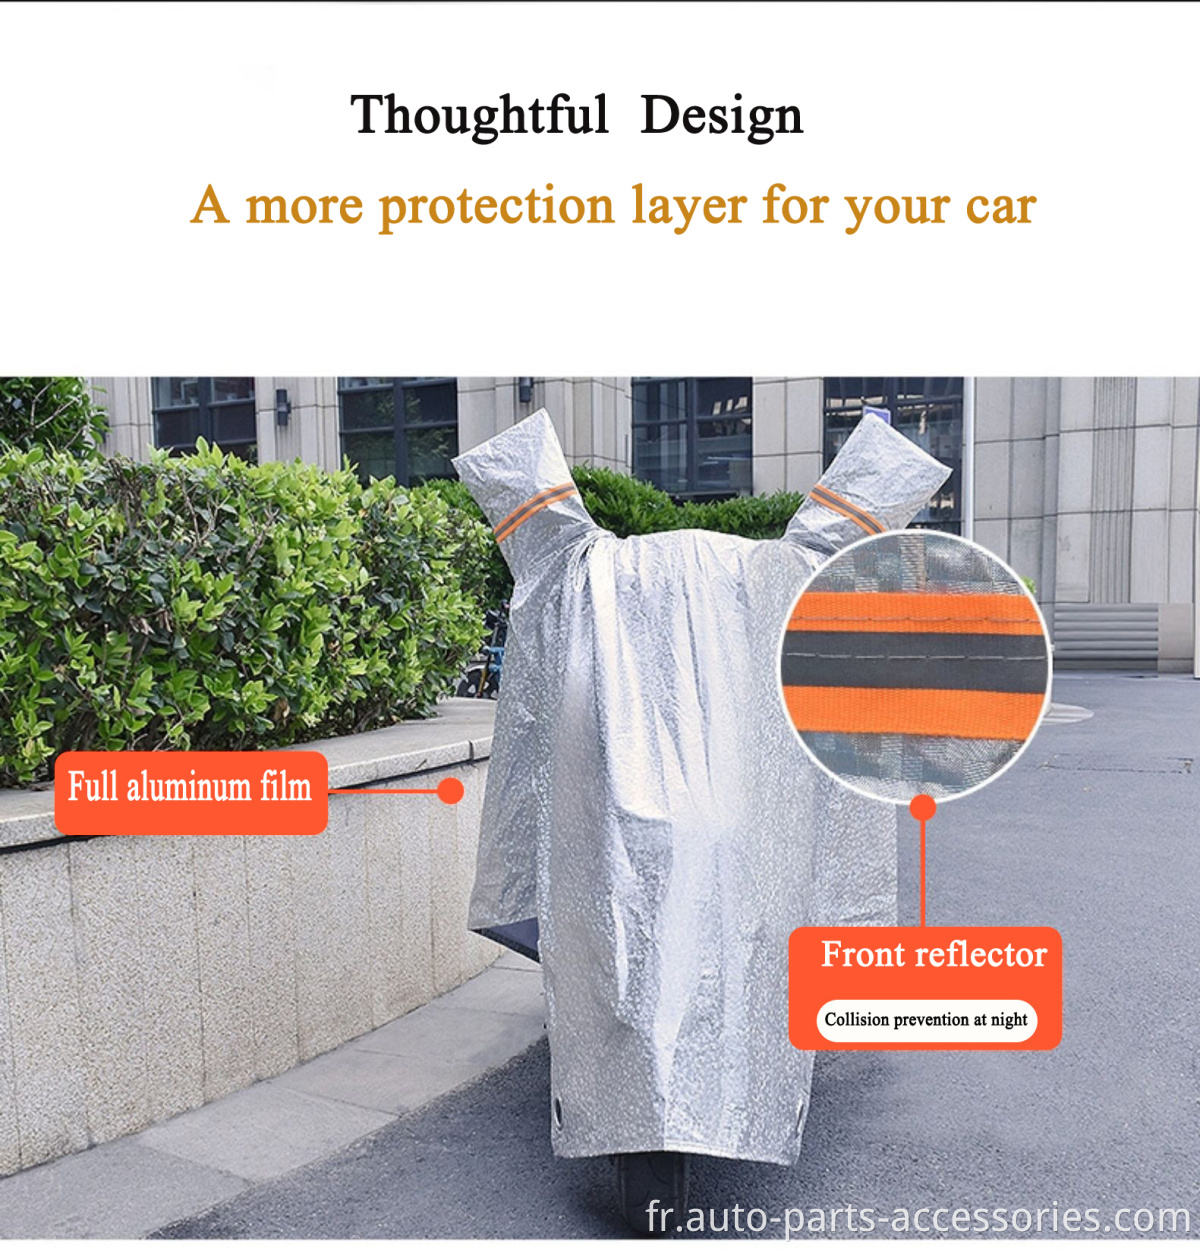 All Mether Sun Protector Anti-Scratch Durable Durable Dust Dust Resistric Motorcycle Scooter Toit Cover